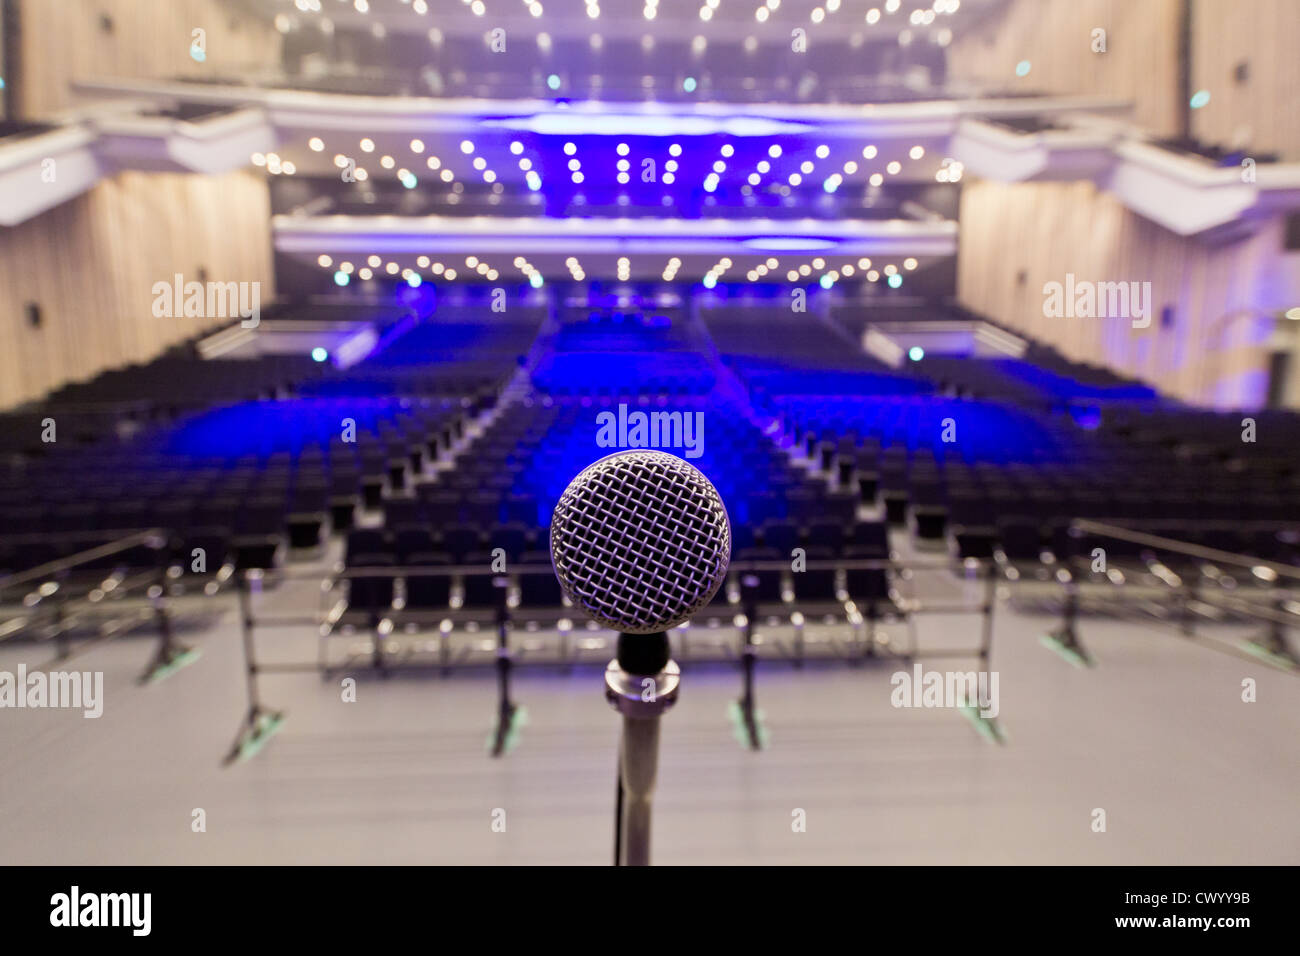 A close-up photo of a microphone in an empty concert venue. Stock Photo